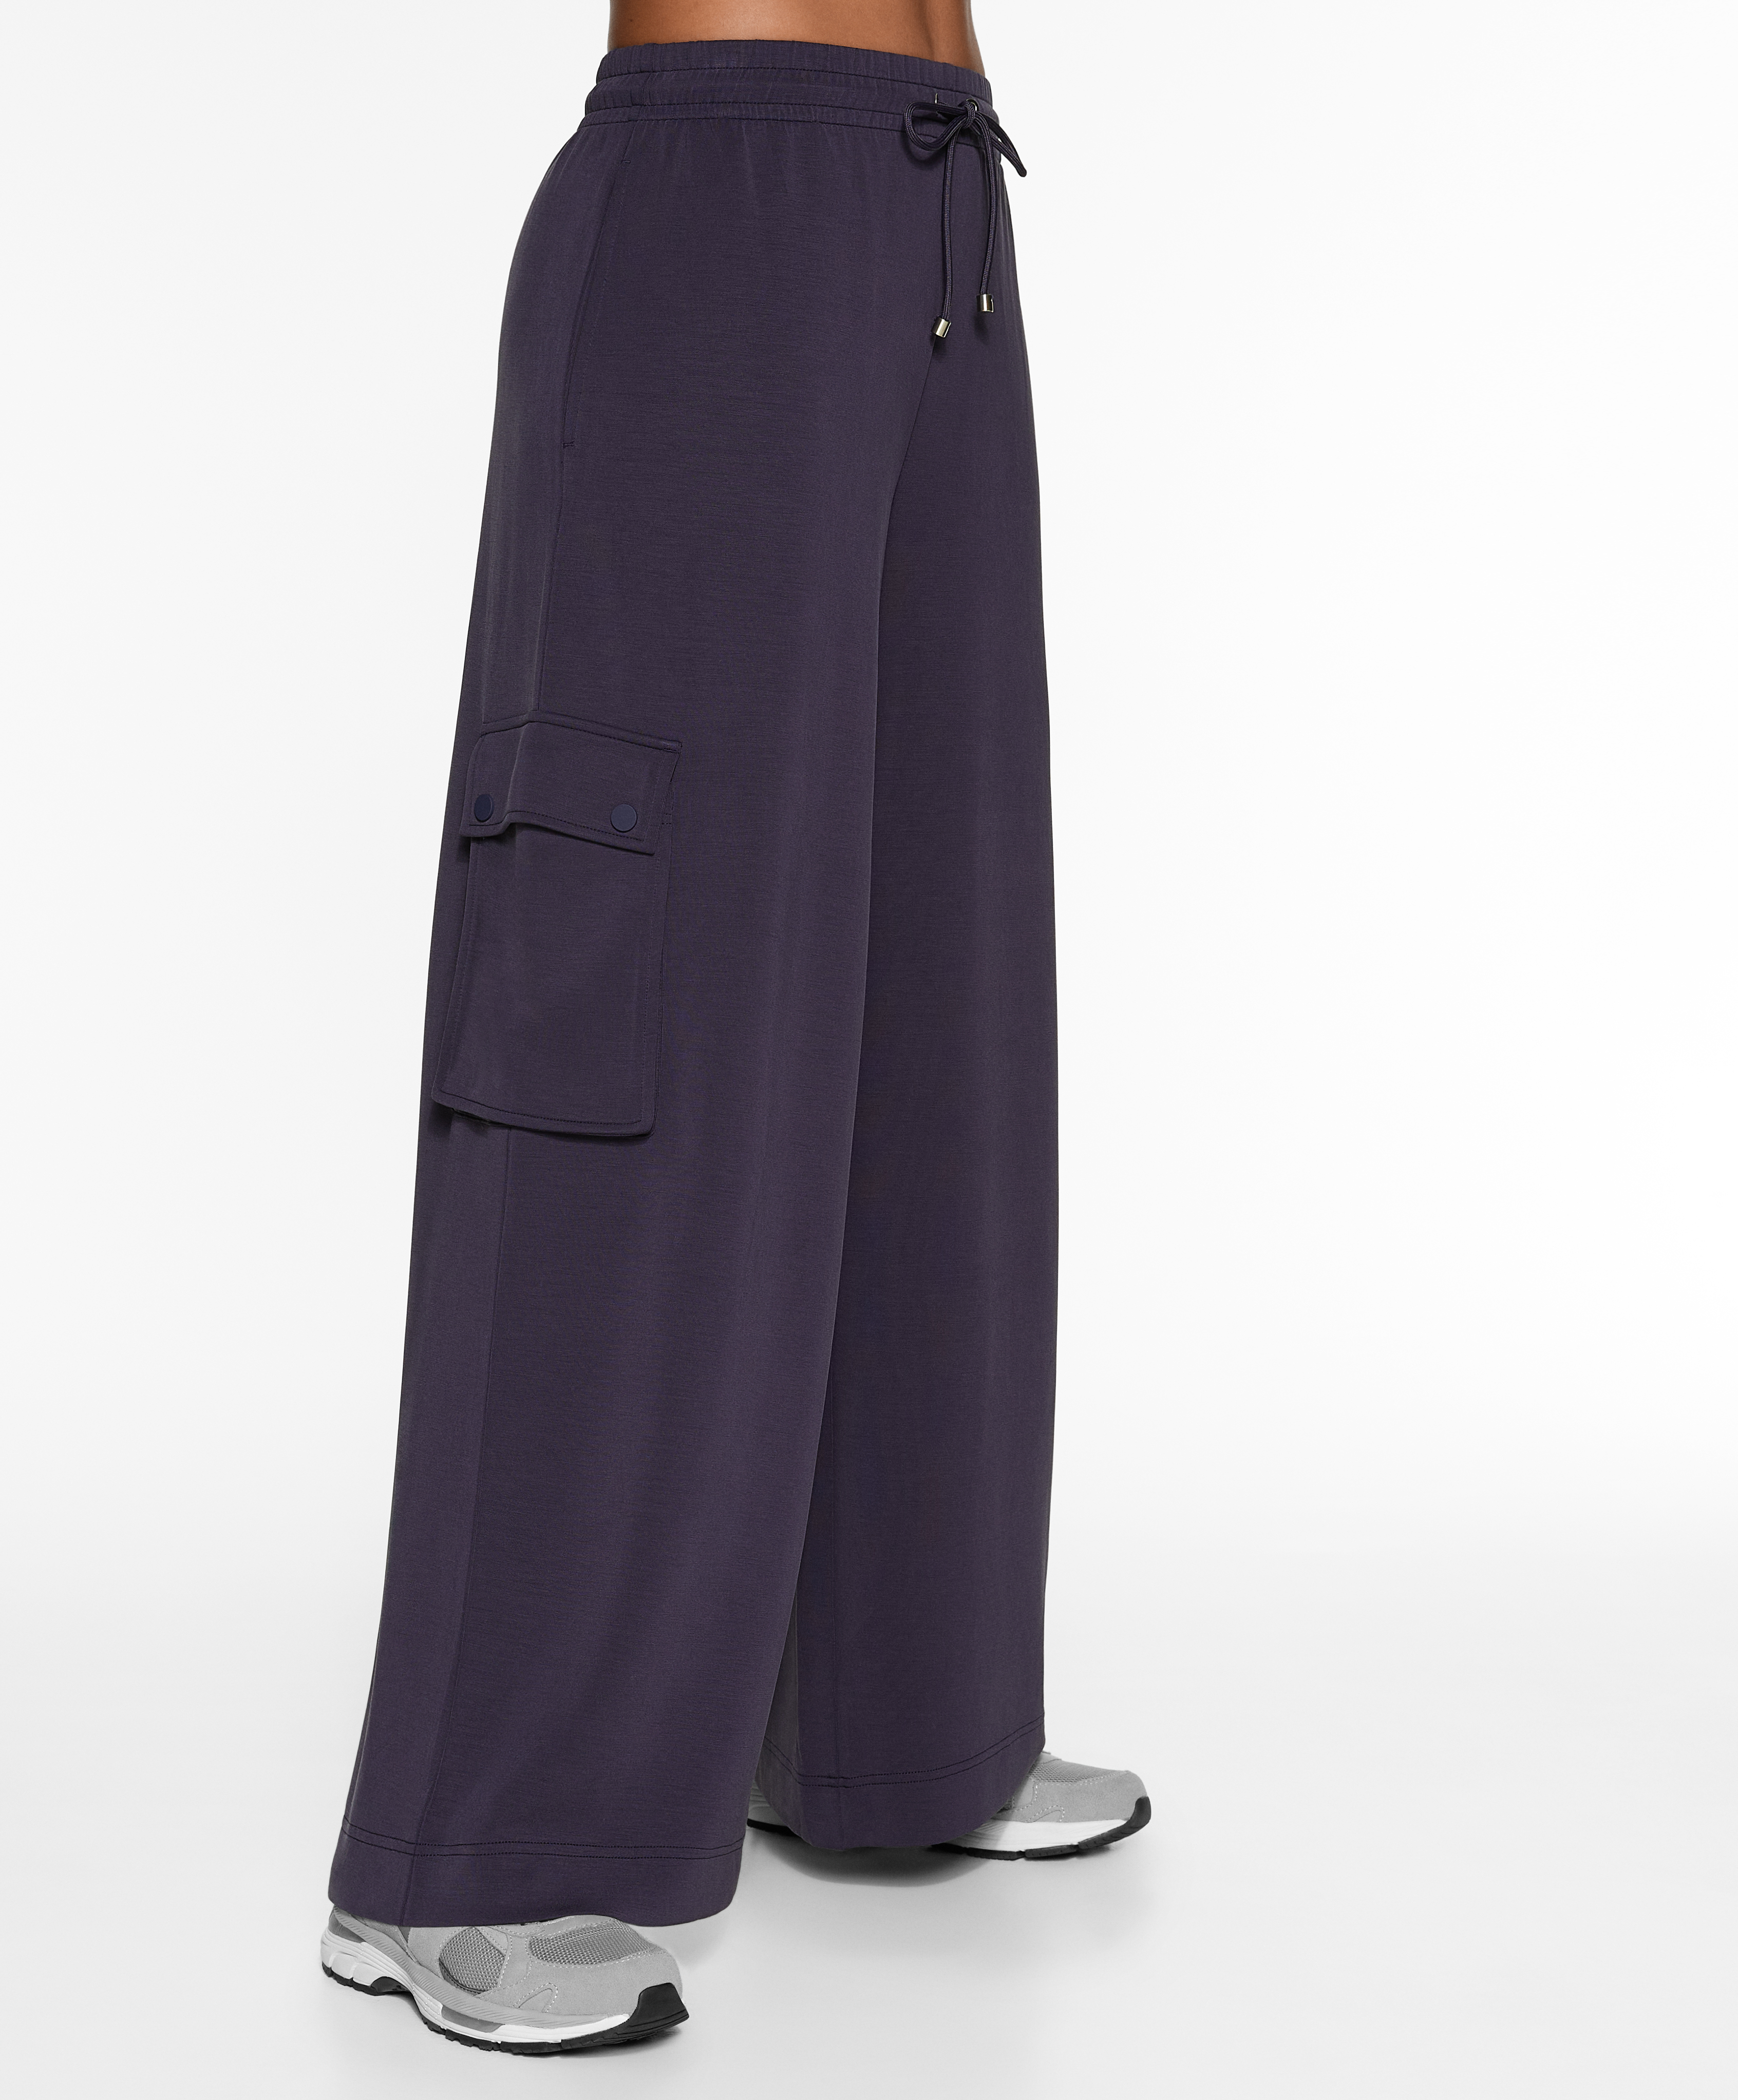 Wide-leg straight-cut trousers with modal and pockets